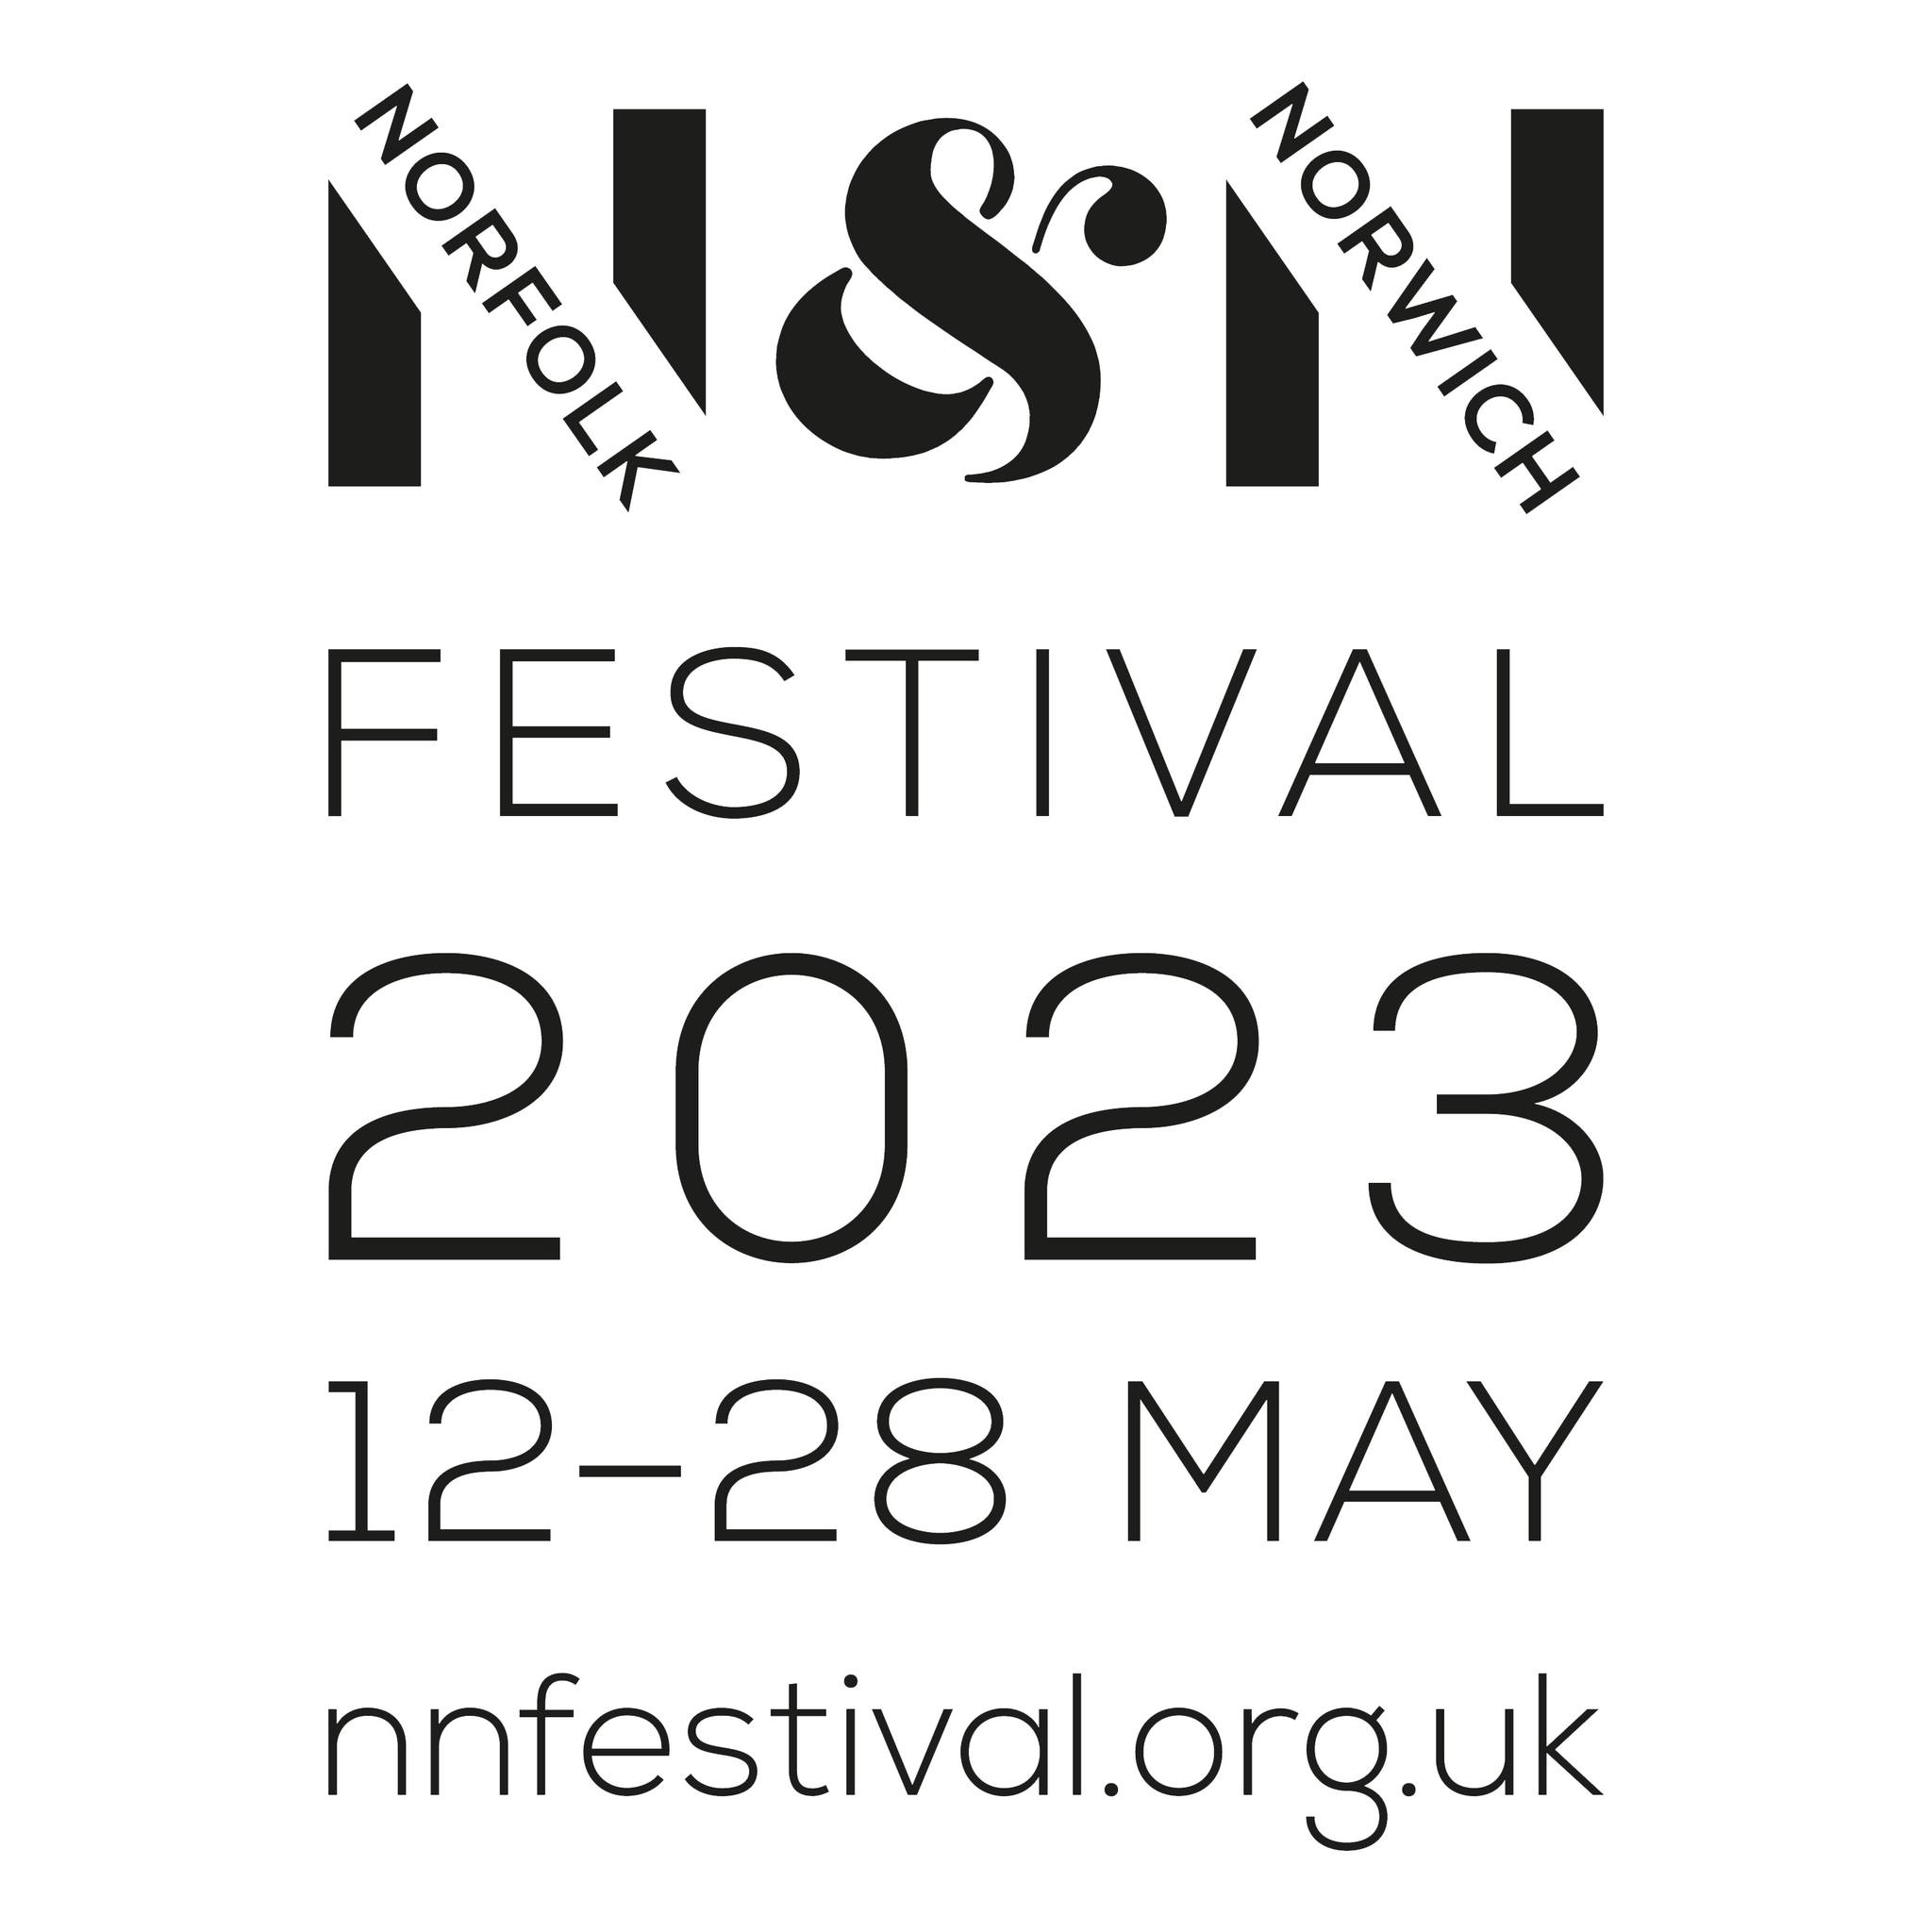 Norfolk & Norwich Festival 2023, Various locations around Norwich & Norfolk, England | One of the oldest city Festivals in the country. For 17 days every May they transform & celebrate Norwich & Norfolk  bringing a world class programme of international art and home grown talent to venues and open spaces across the region. | festival, norwich, norfolk, programme, classical, venues, international, music, theatre, circus, dance, visual arts, outdoors, city towns, unique, classical